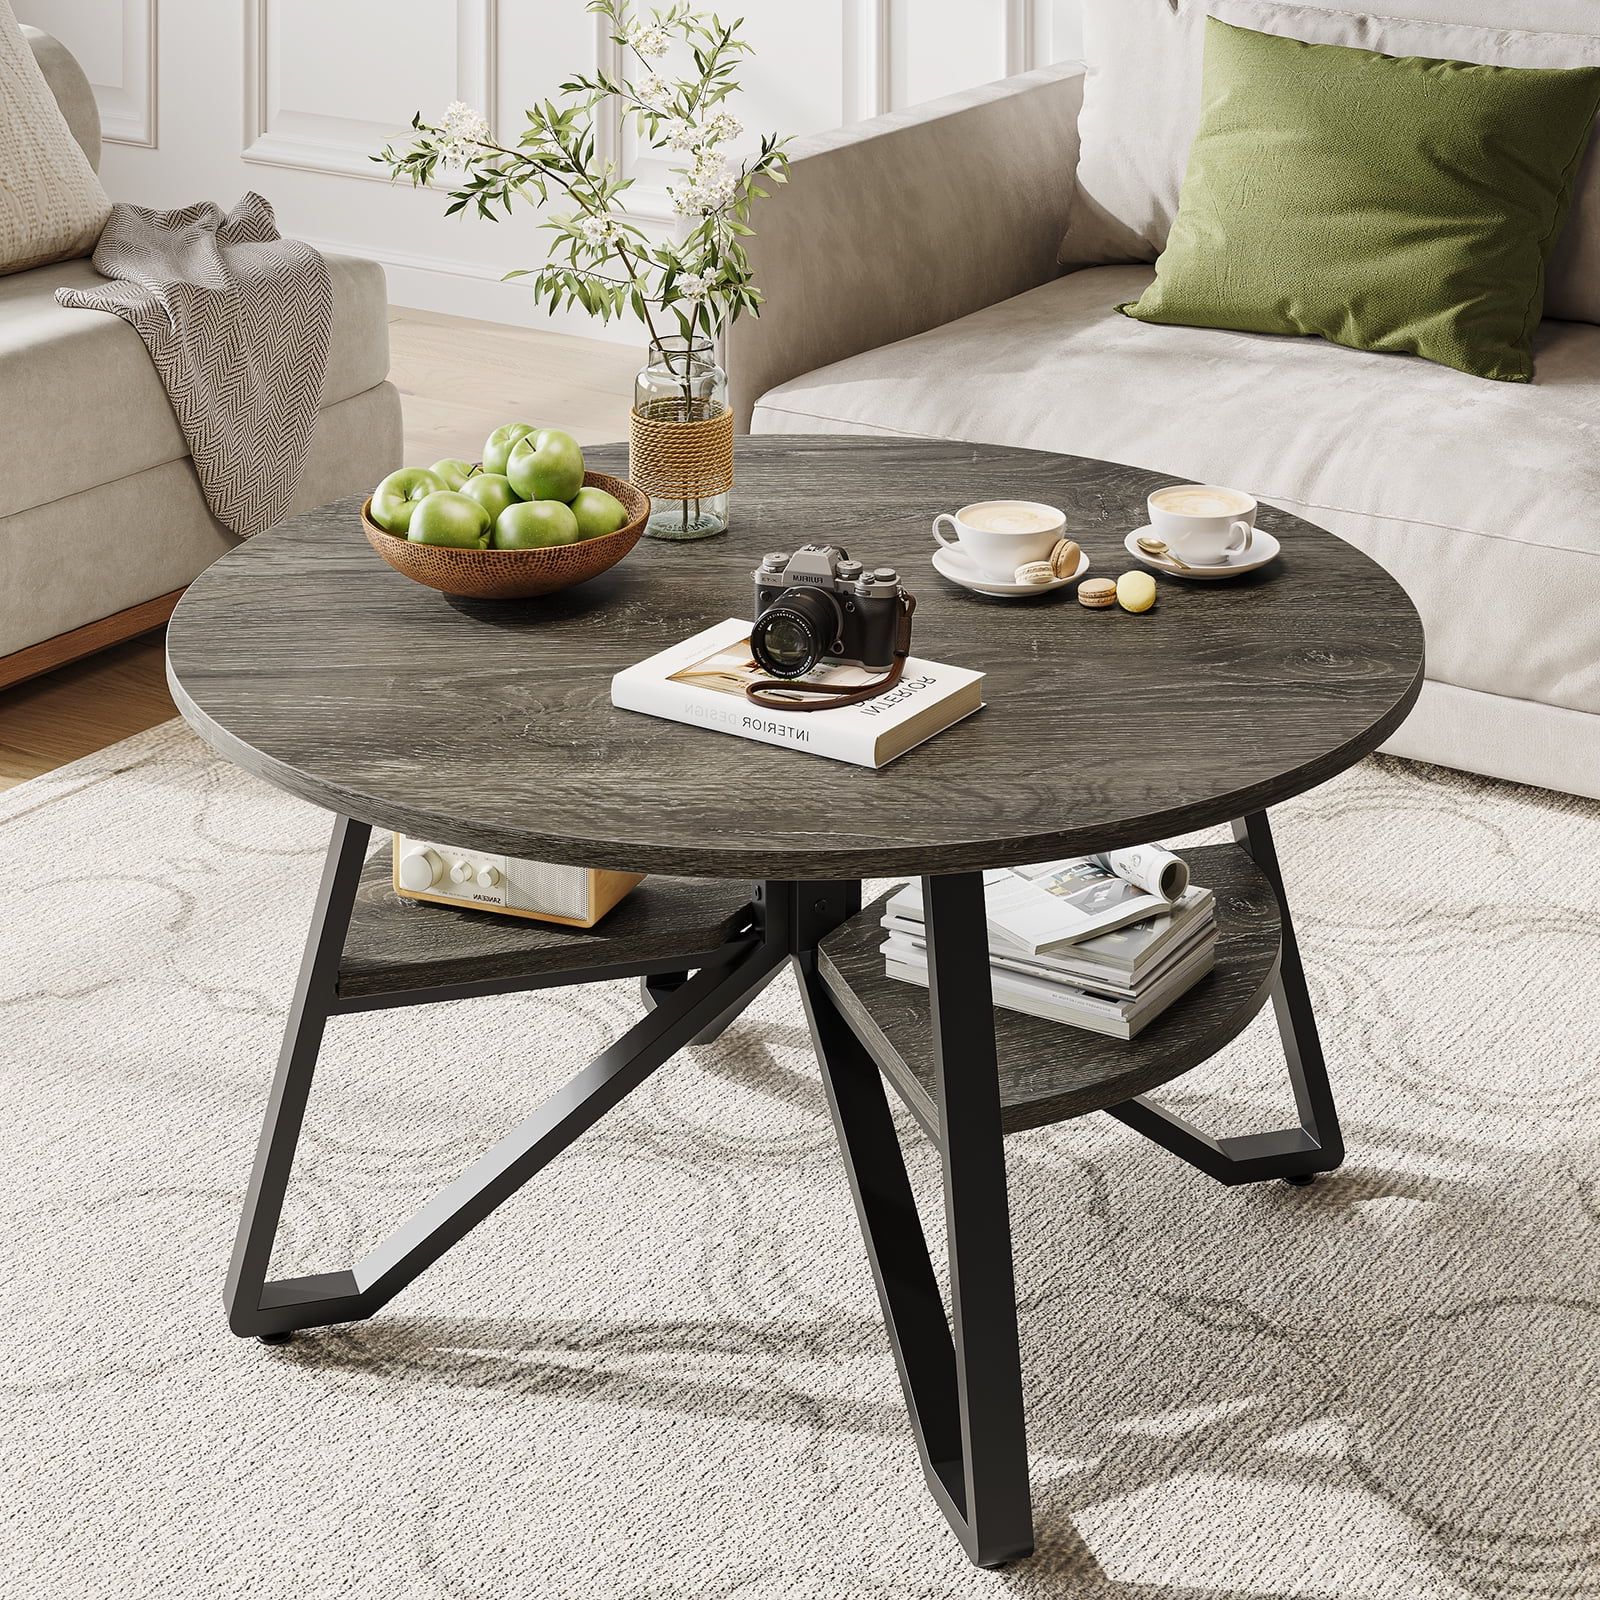 Famous Round Coffee Tables With Storage Throughout Bestier Round Coffee Table With Storage, Living Room Tables With Sturdy  Metal Legs, Black Marble – Walmart (View 9 of 10)